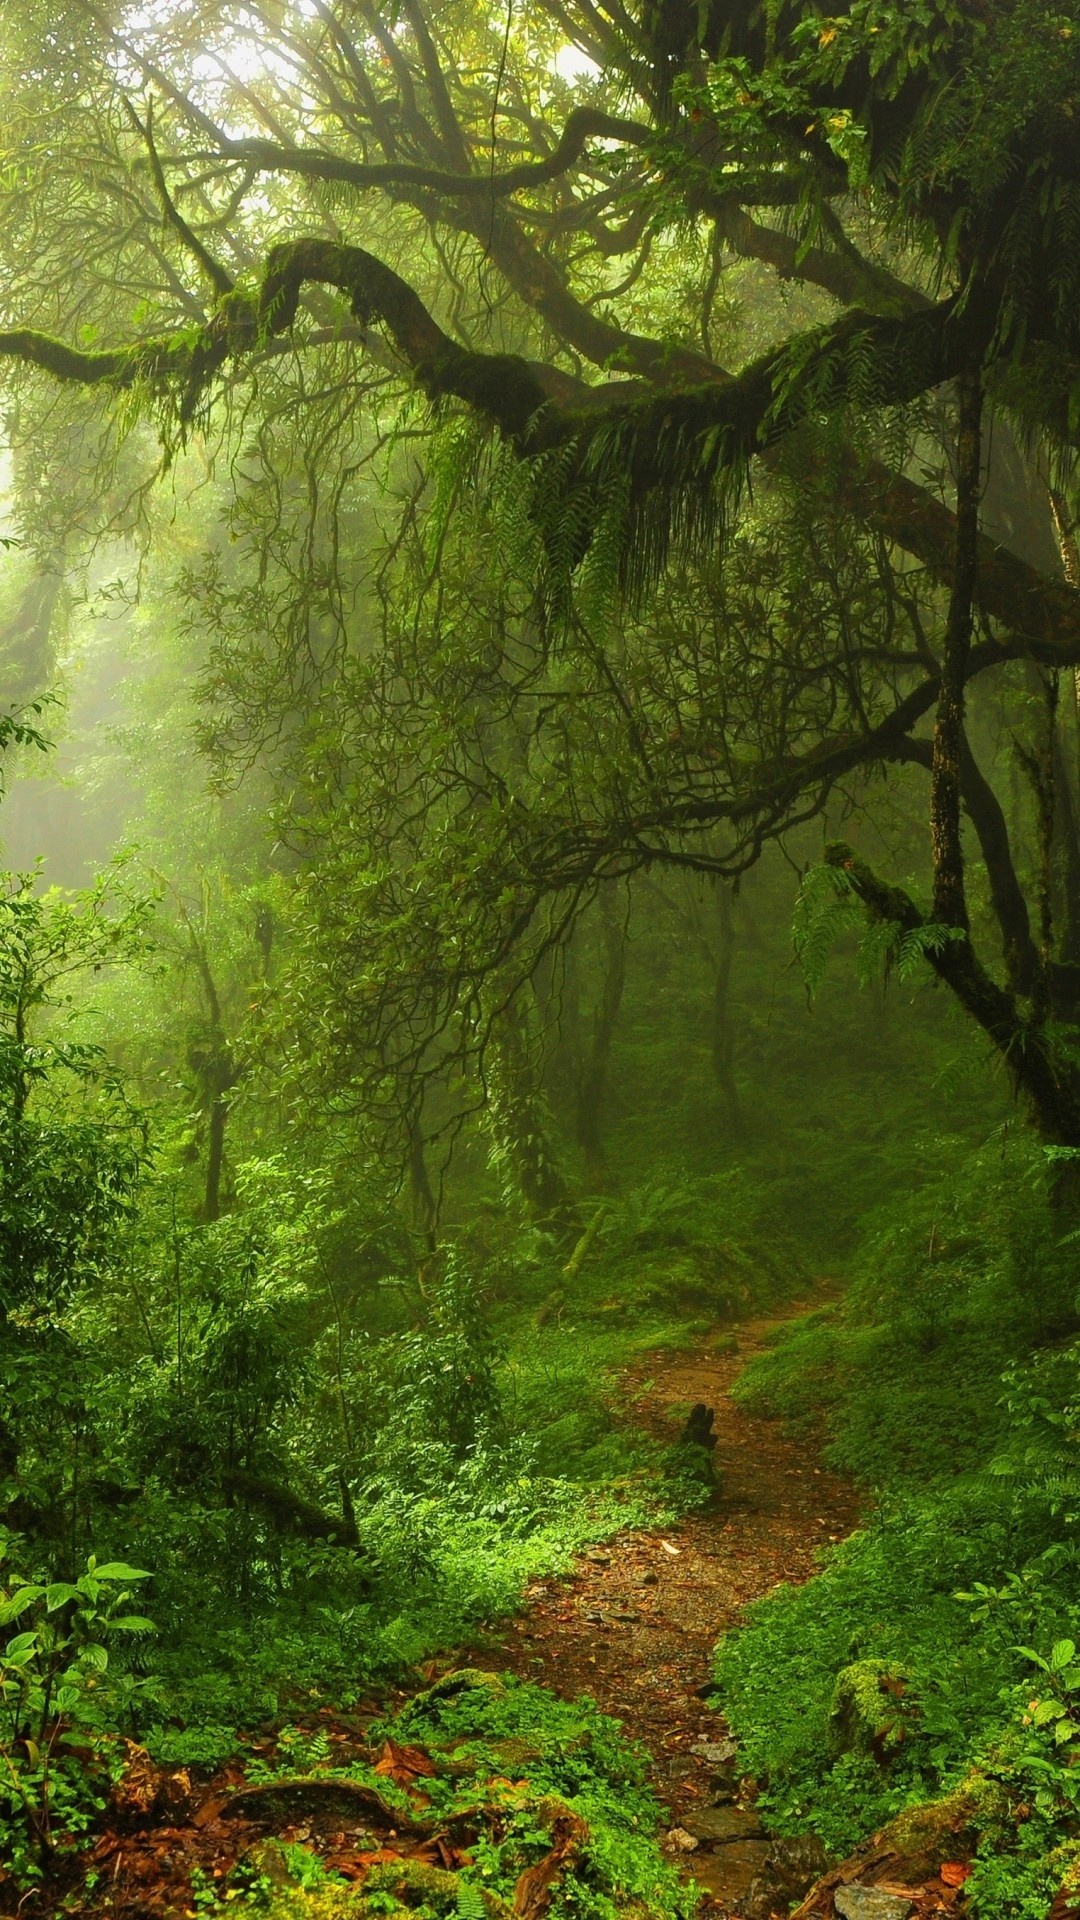 Summer forest wallpaper, Nature's hues, Sunlit greenery, Tranquil escape, 1080x1920 Full HD Phone